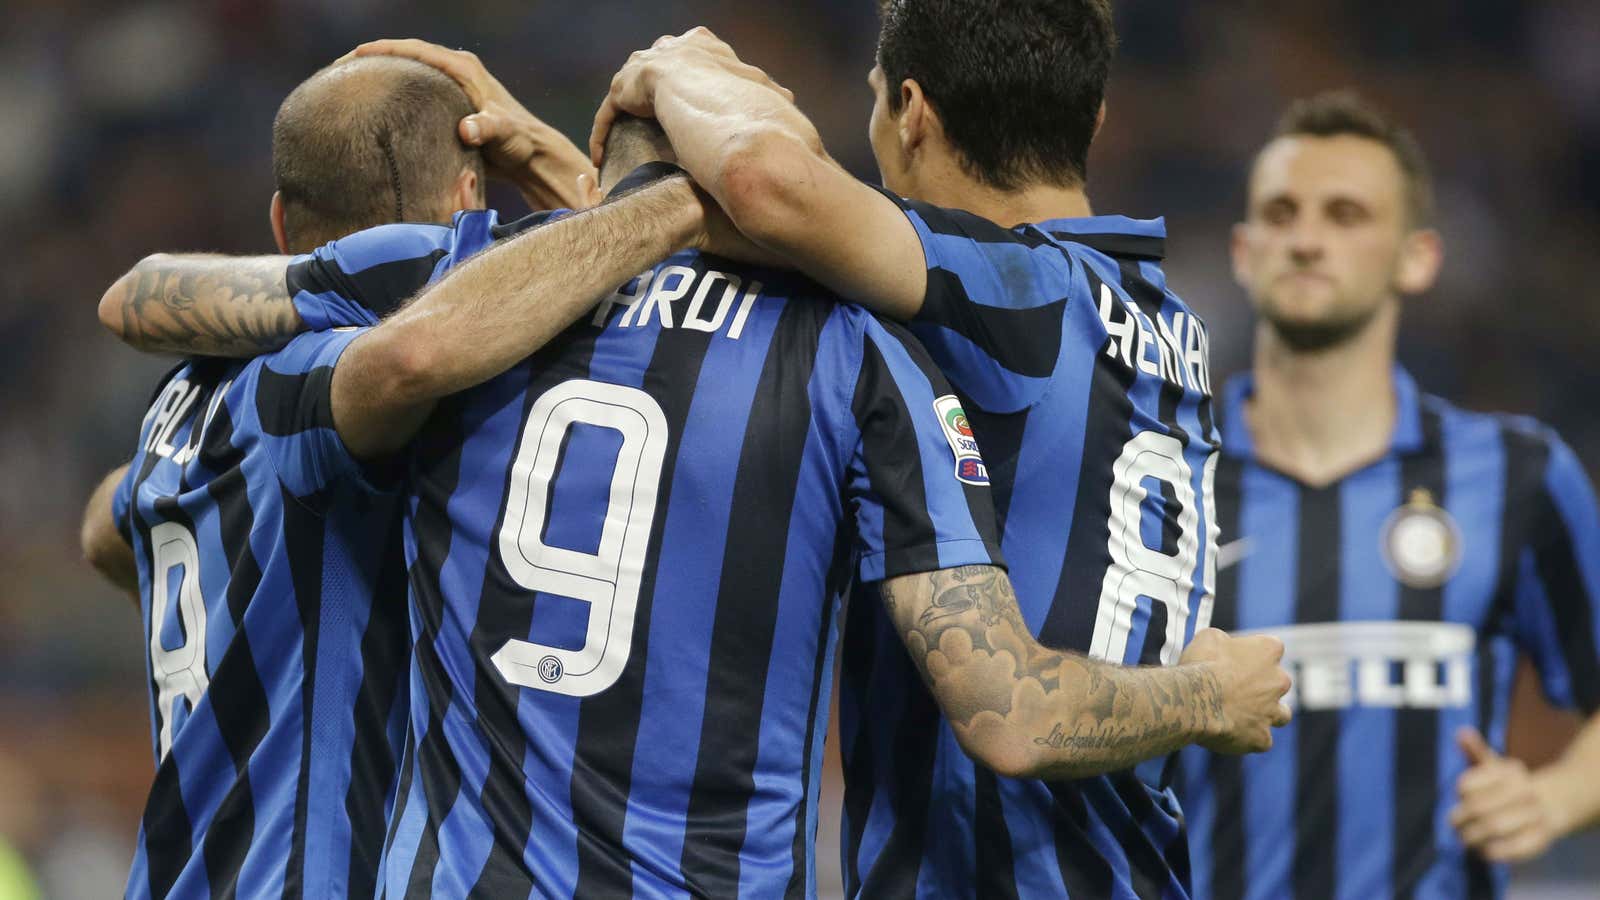 Maybe Inter Milan should stick to jerseys.